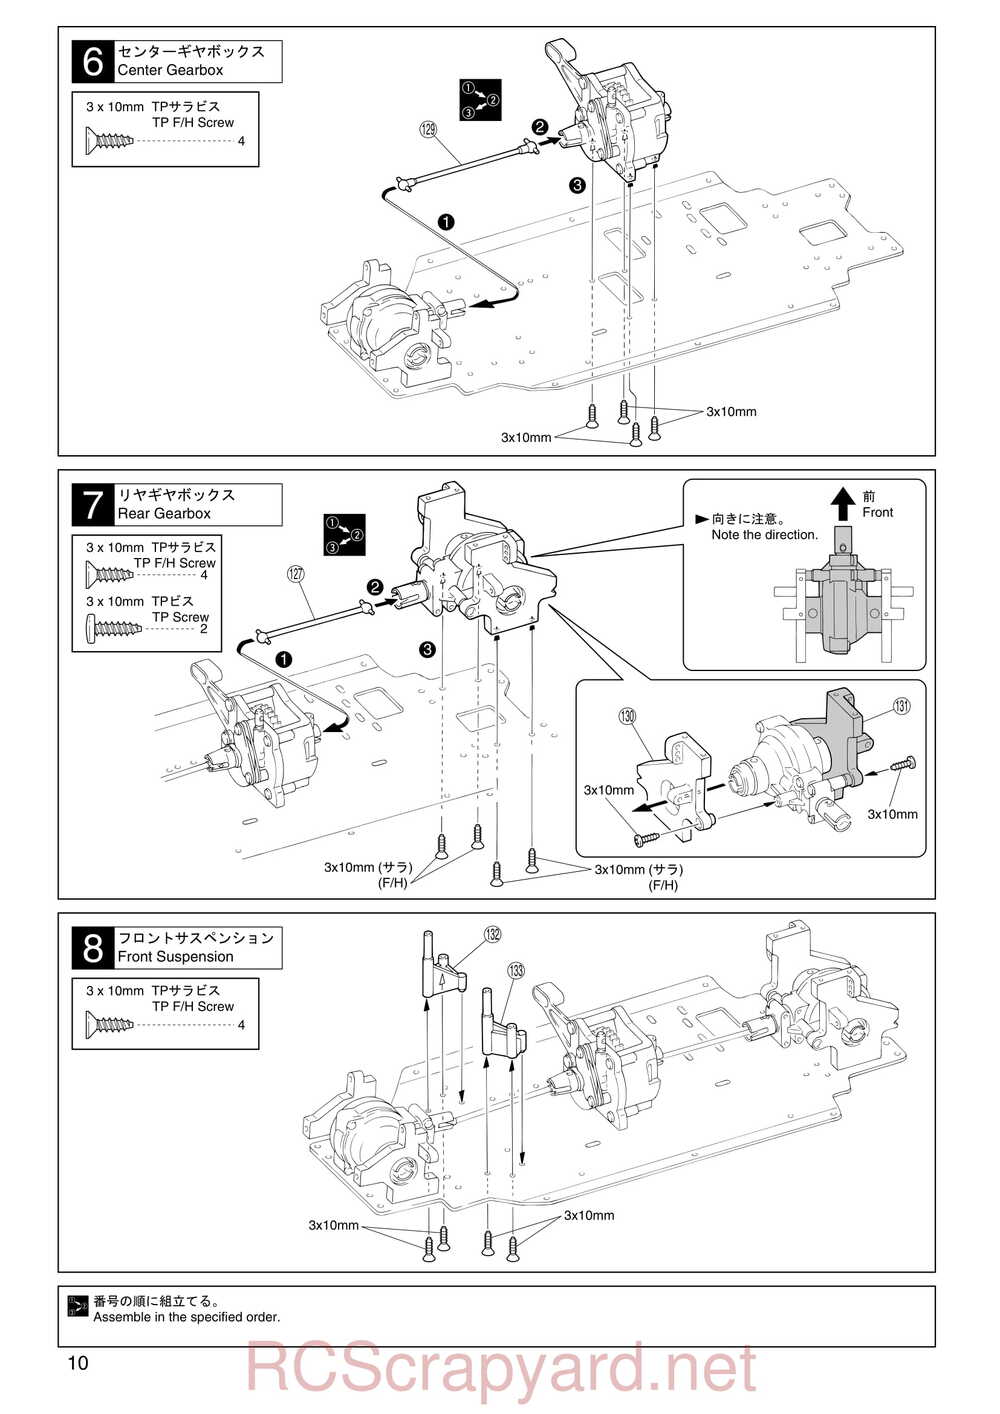 Kyosho - 31061 - TR-15 Rally - Manual - Page 10